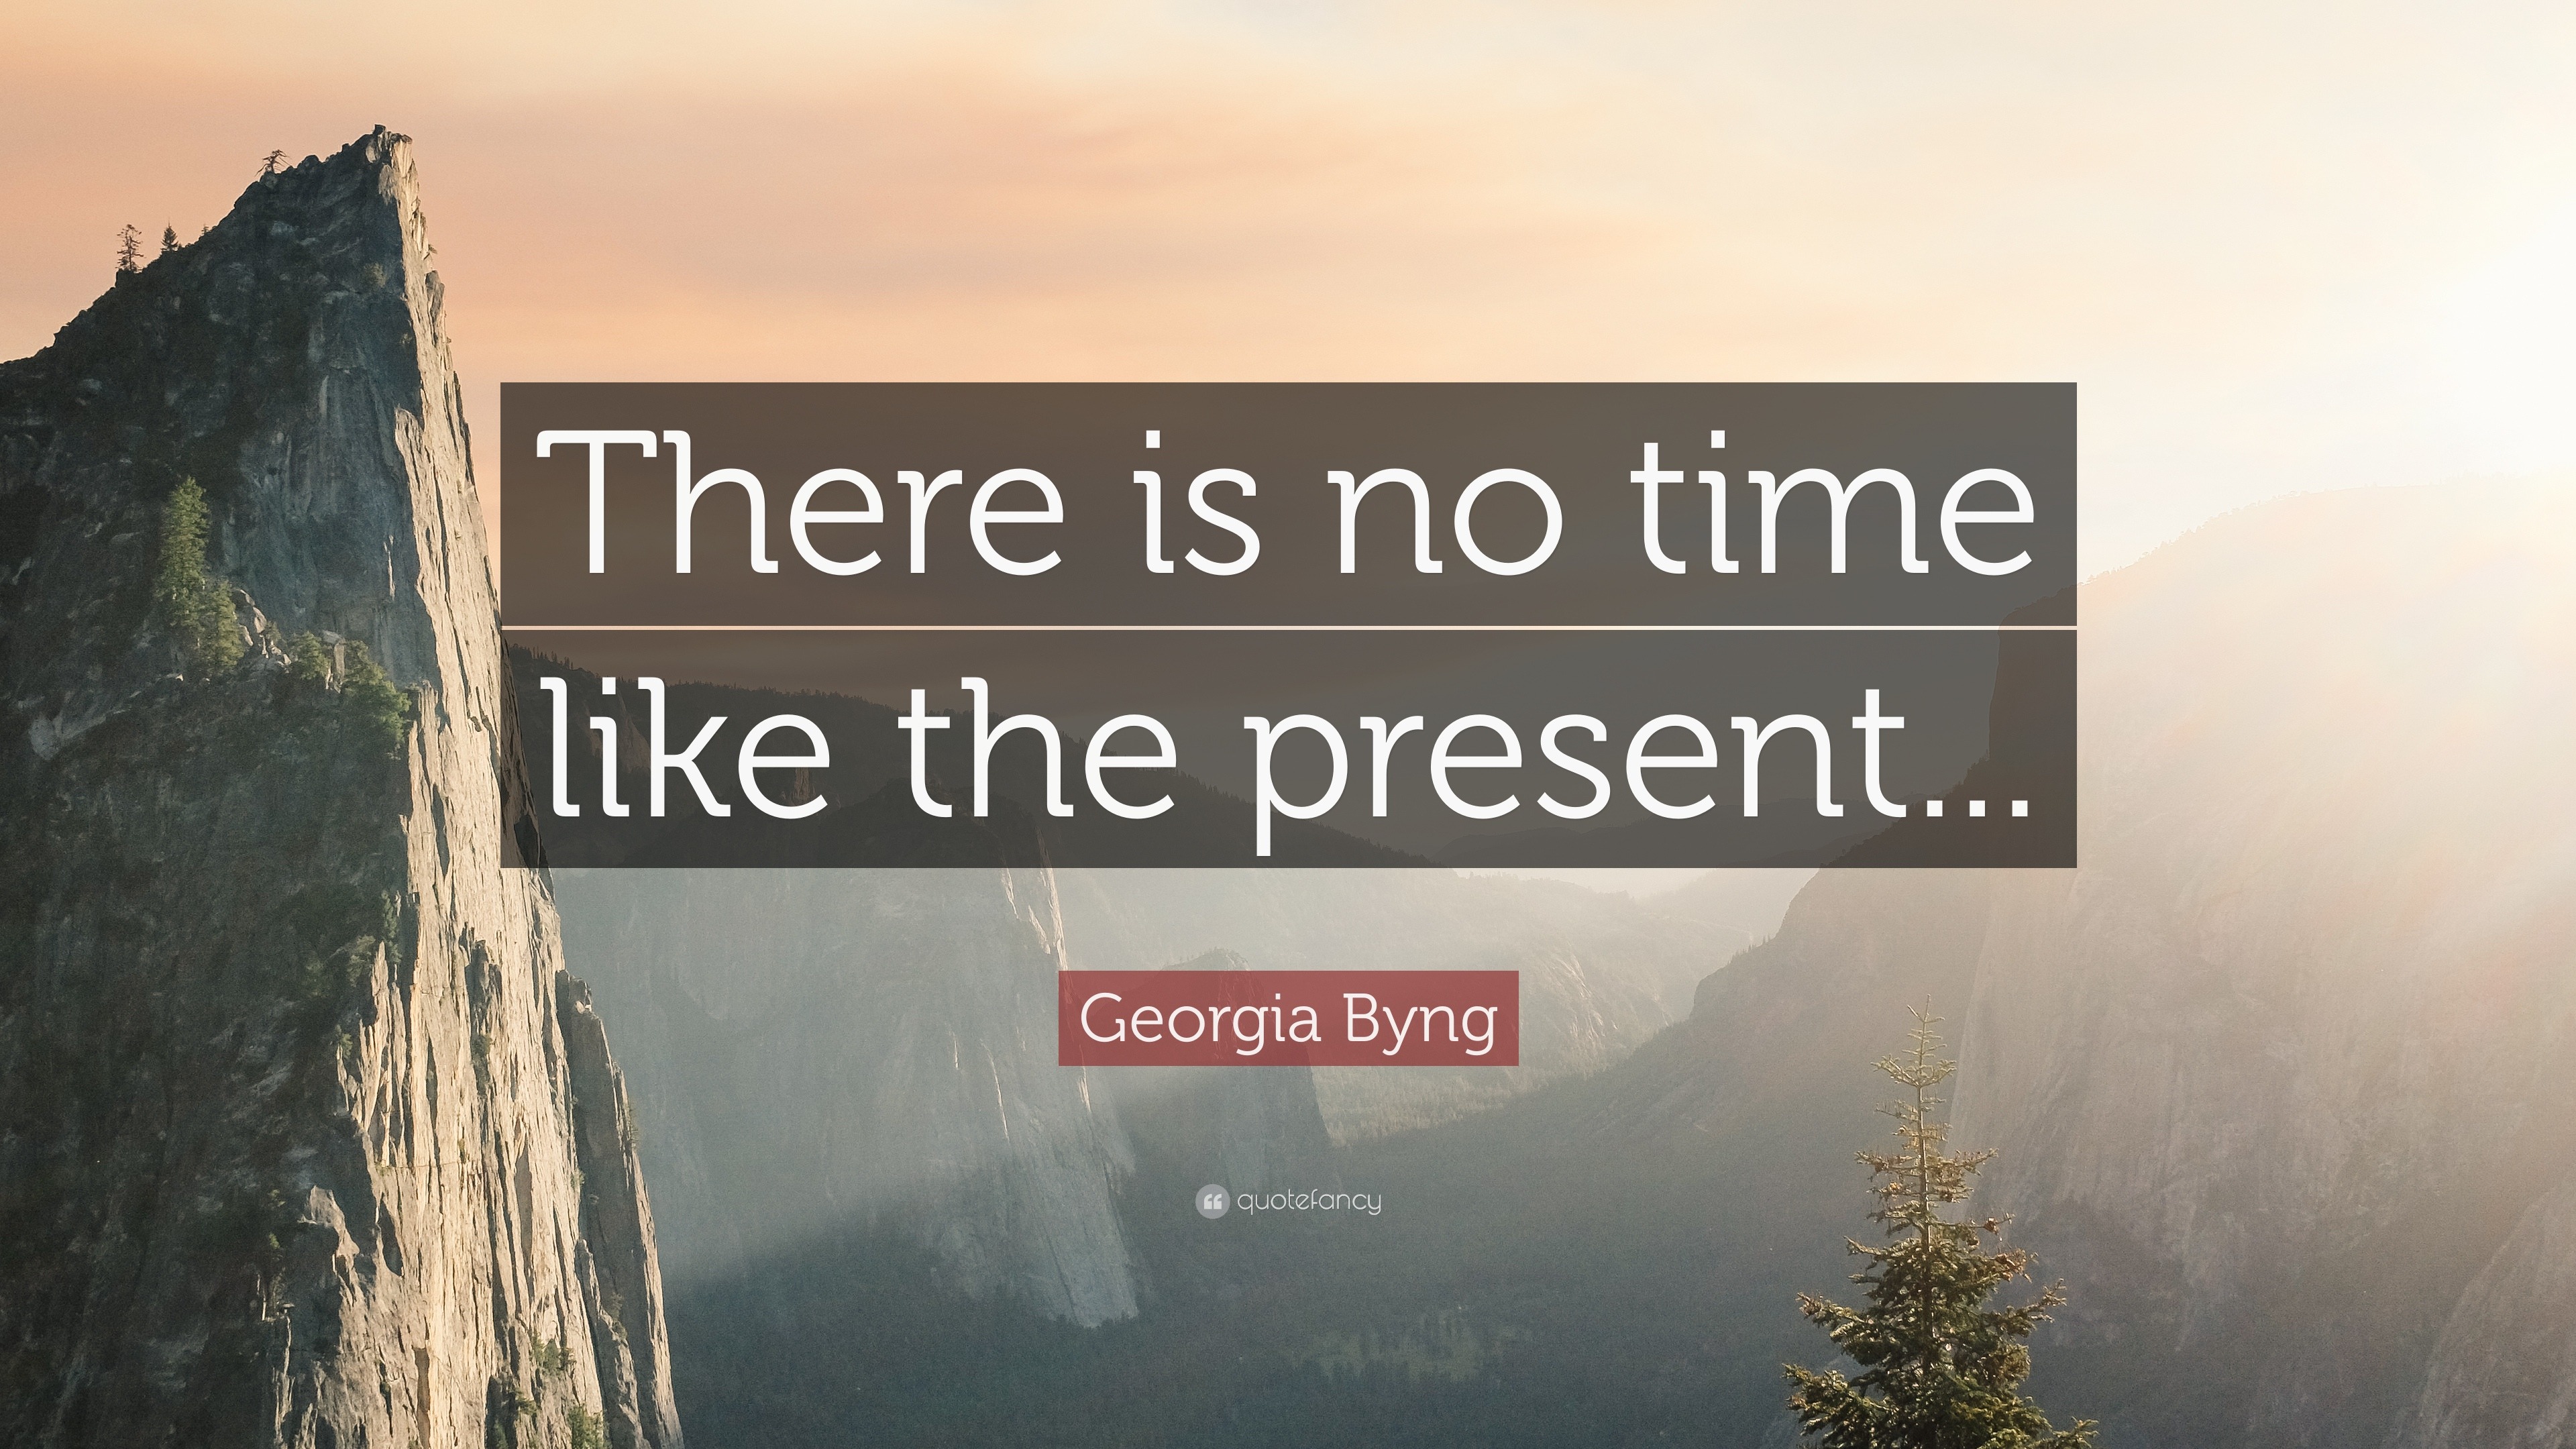 essay on there's no time like the present